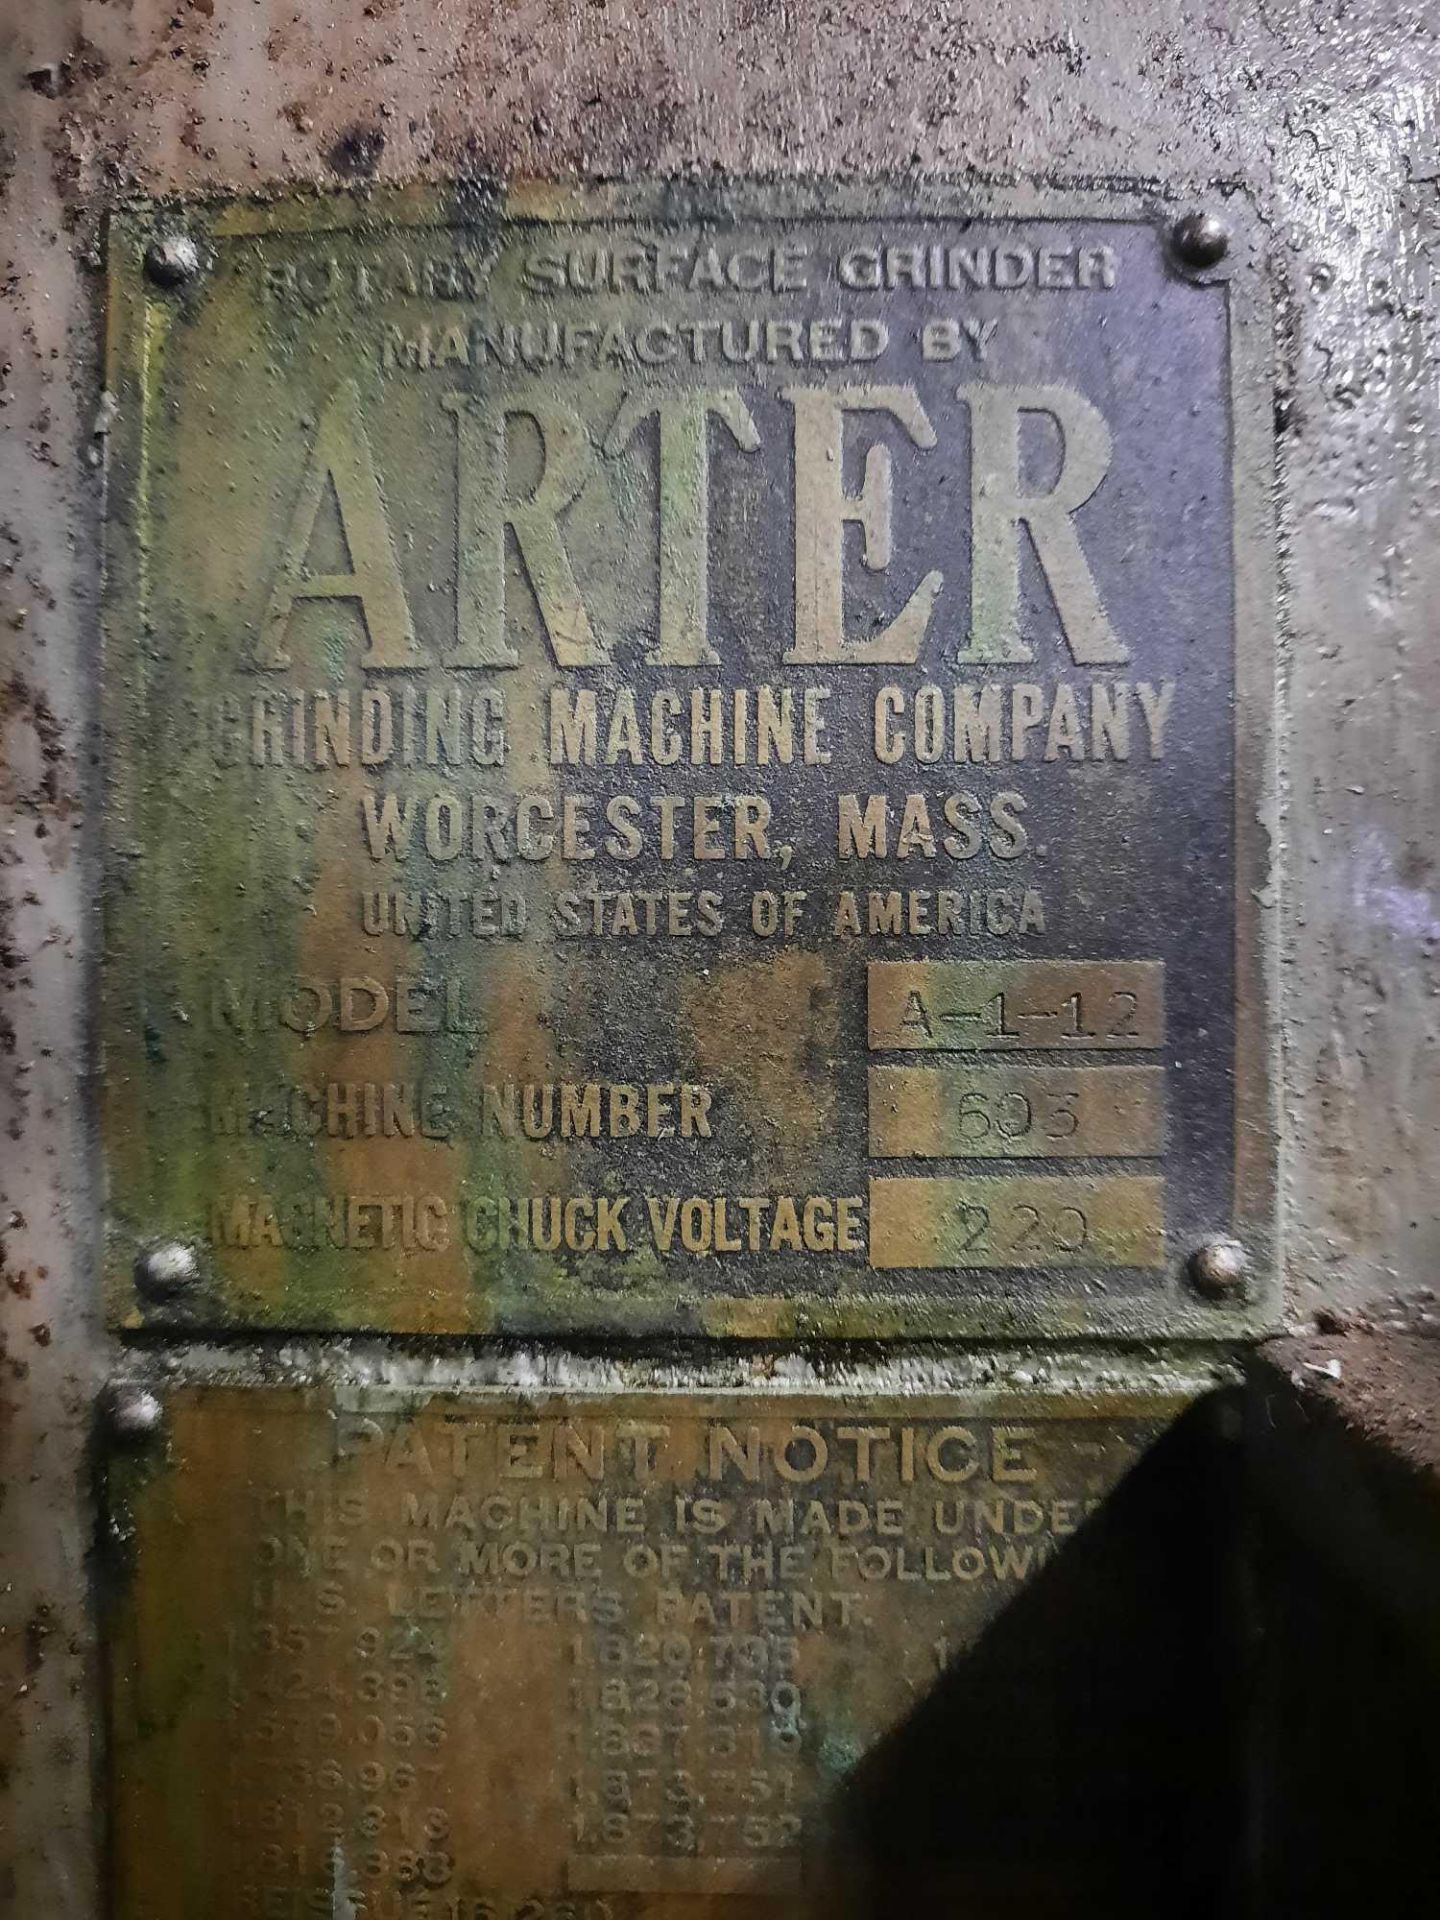 Arter rotary grinder, model A-1-12, serial 603, 14 inch chuck, overall dimensions 66 x 43 x 70 - Image 7 of 8